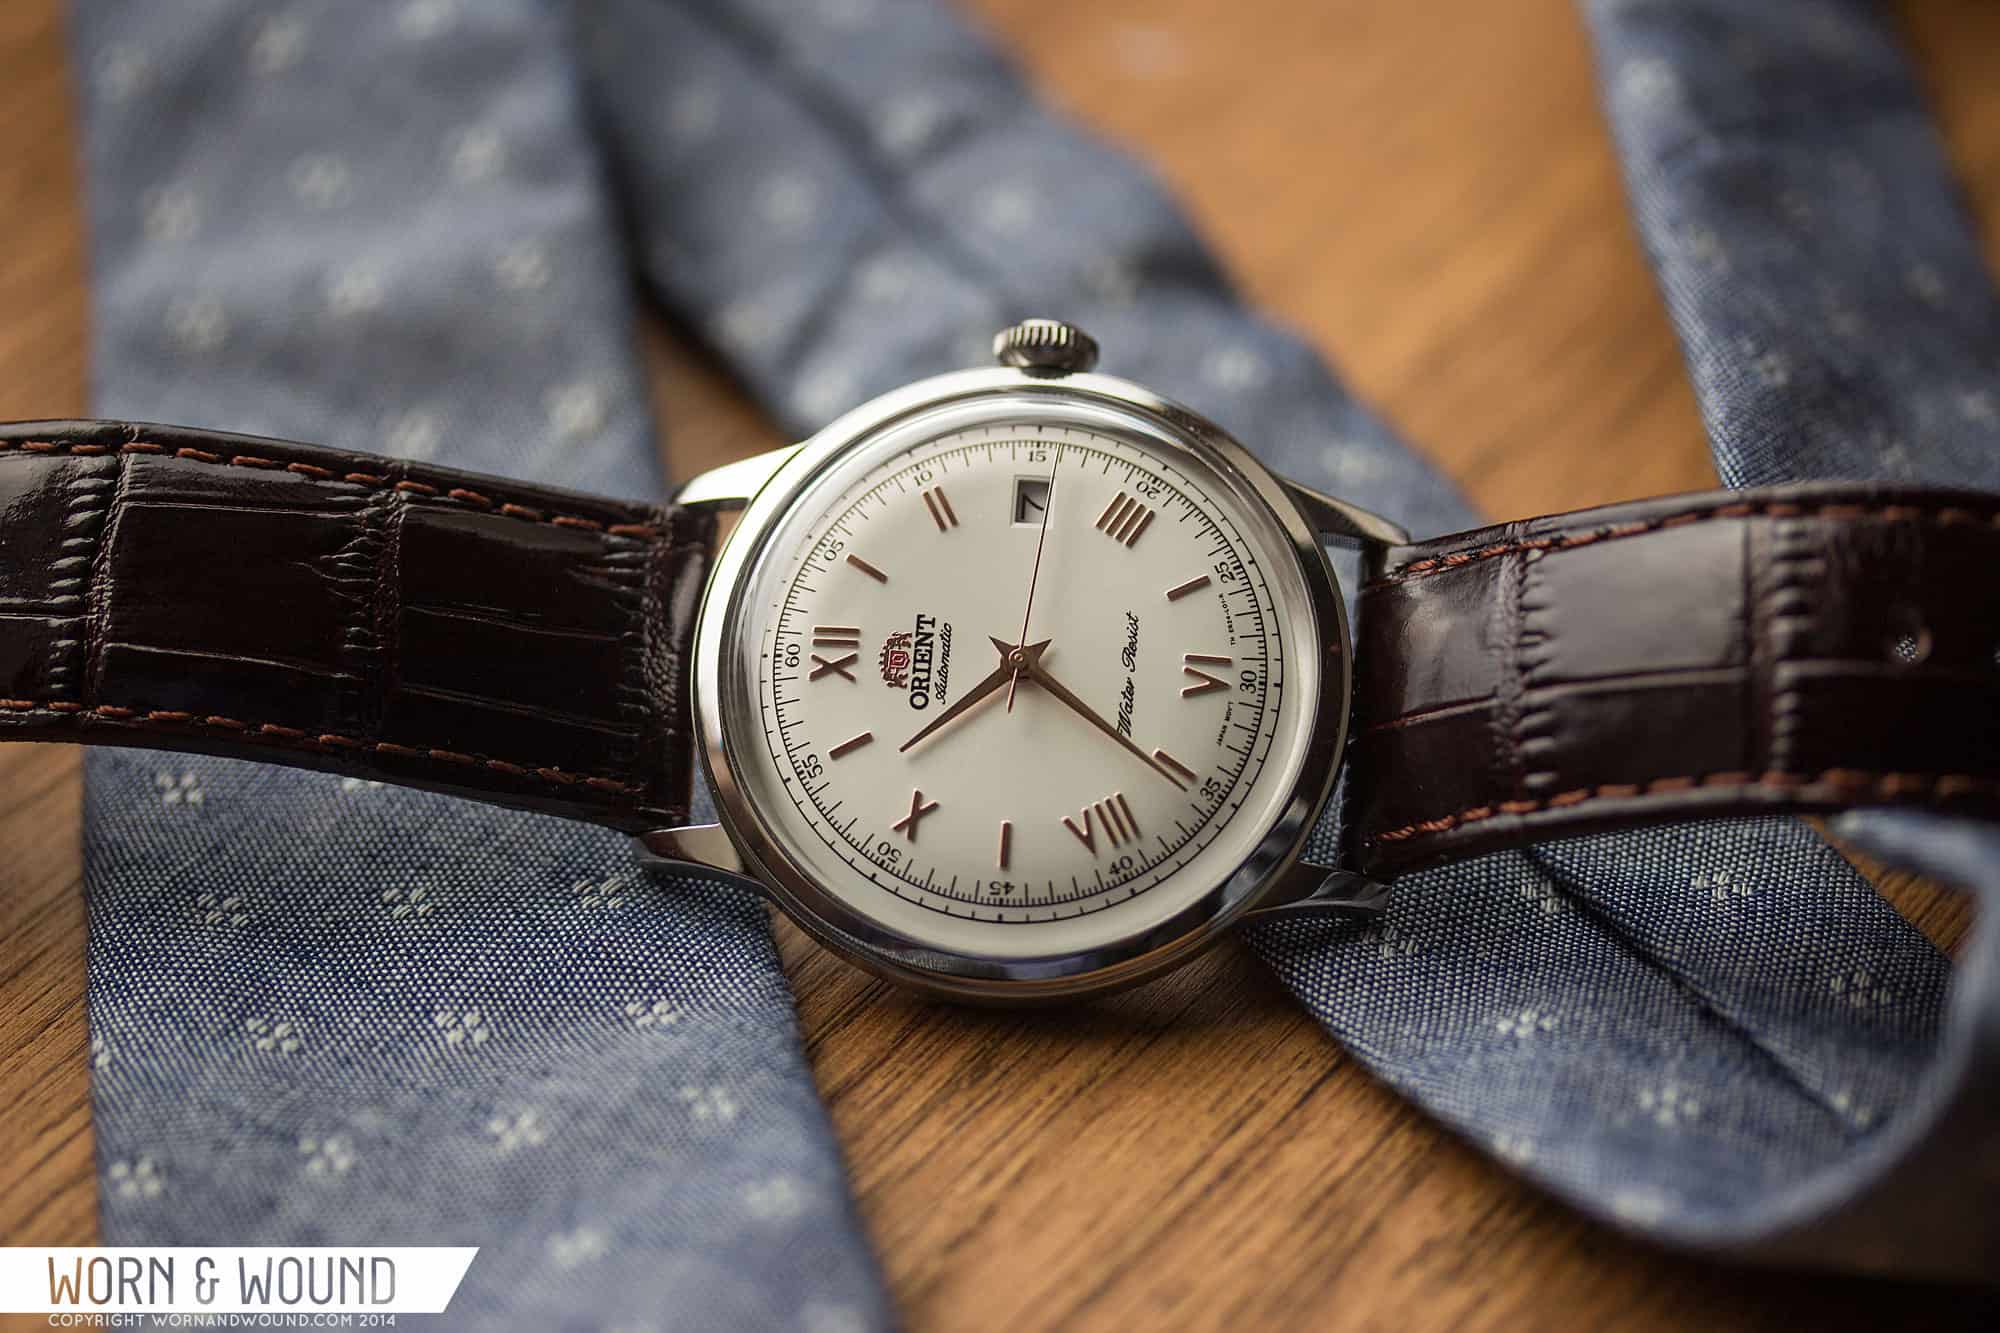 The Orient Bambino: The Perfect Affordable Dress Watch?